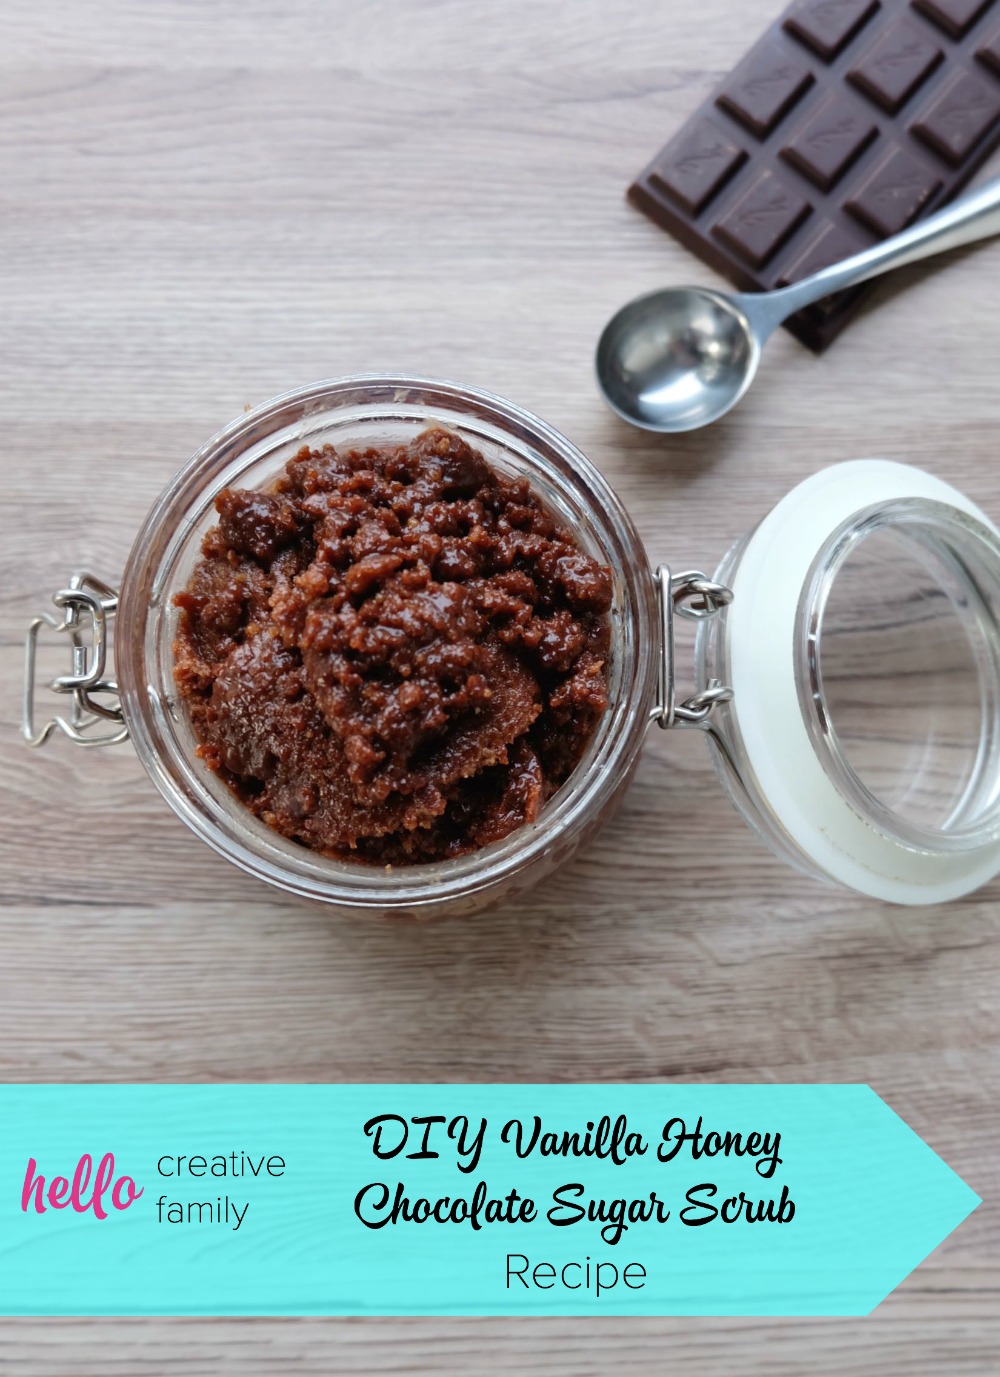 Filled with the moisturizing and anti-bacterial properties of coconut oil, olive oil and honey and the exfoliating effect of brown sugar, this DIY Vanilla Honey Chocolate Sugar Scrub Recipe will leave your skin moisturized, exfoliated and glowing! Use all over your body in the shower, on your hands and feet during manicures and pedicures and even on your face for a natural exfoliating face wash! Say bye bye micro-beads with this all natural DIY body product recipe!